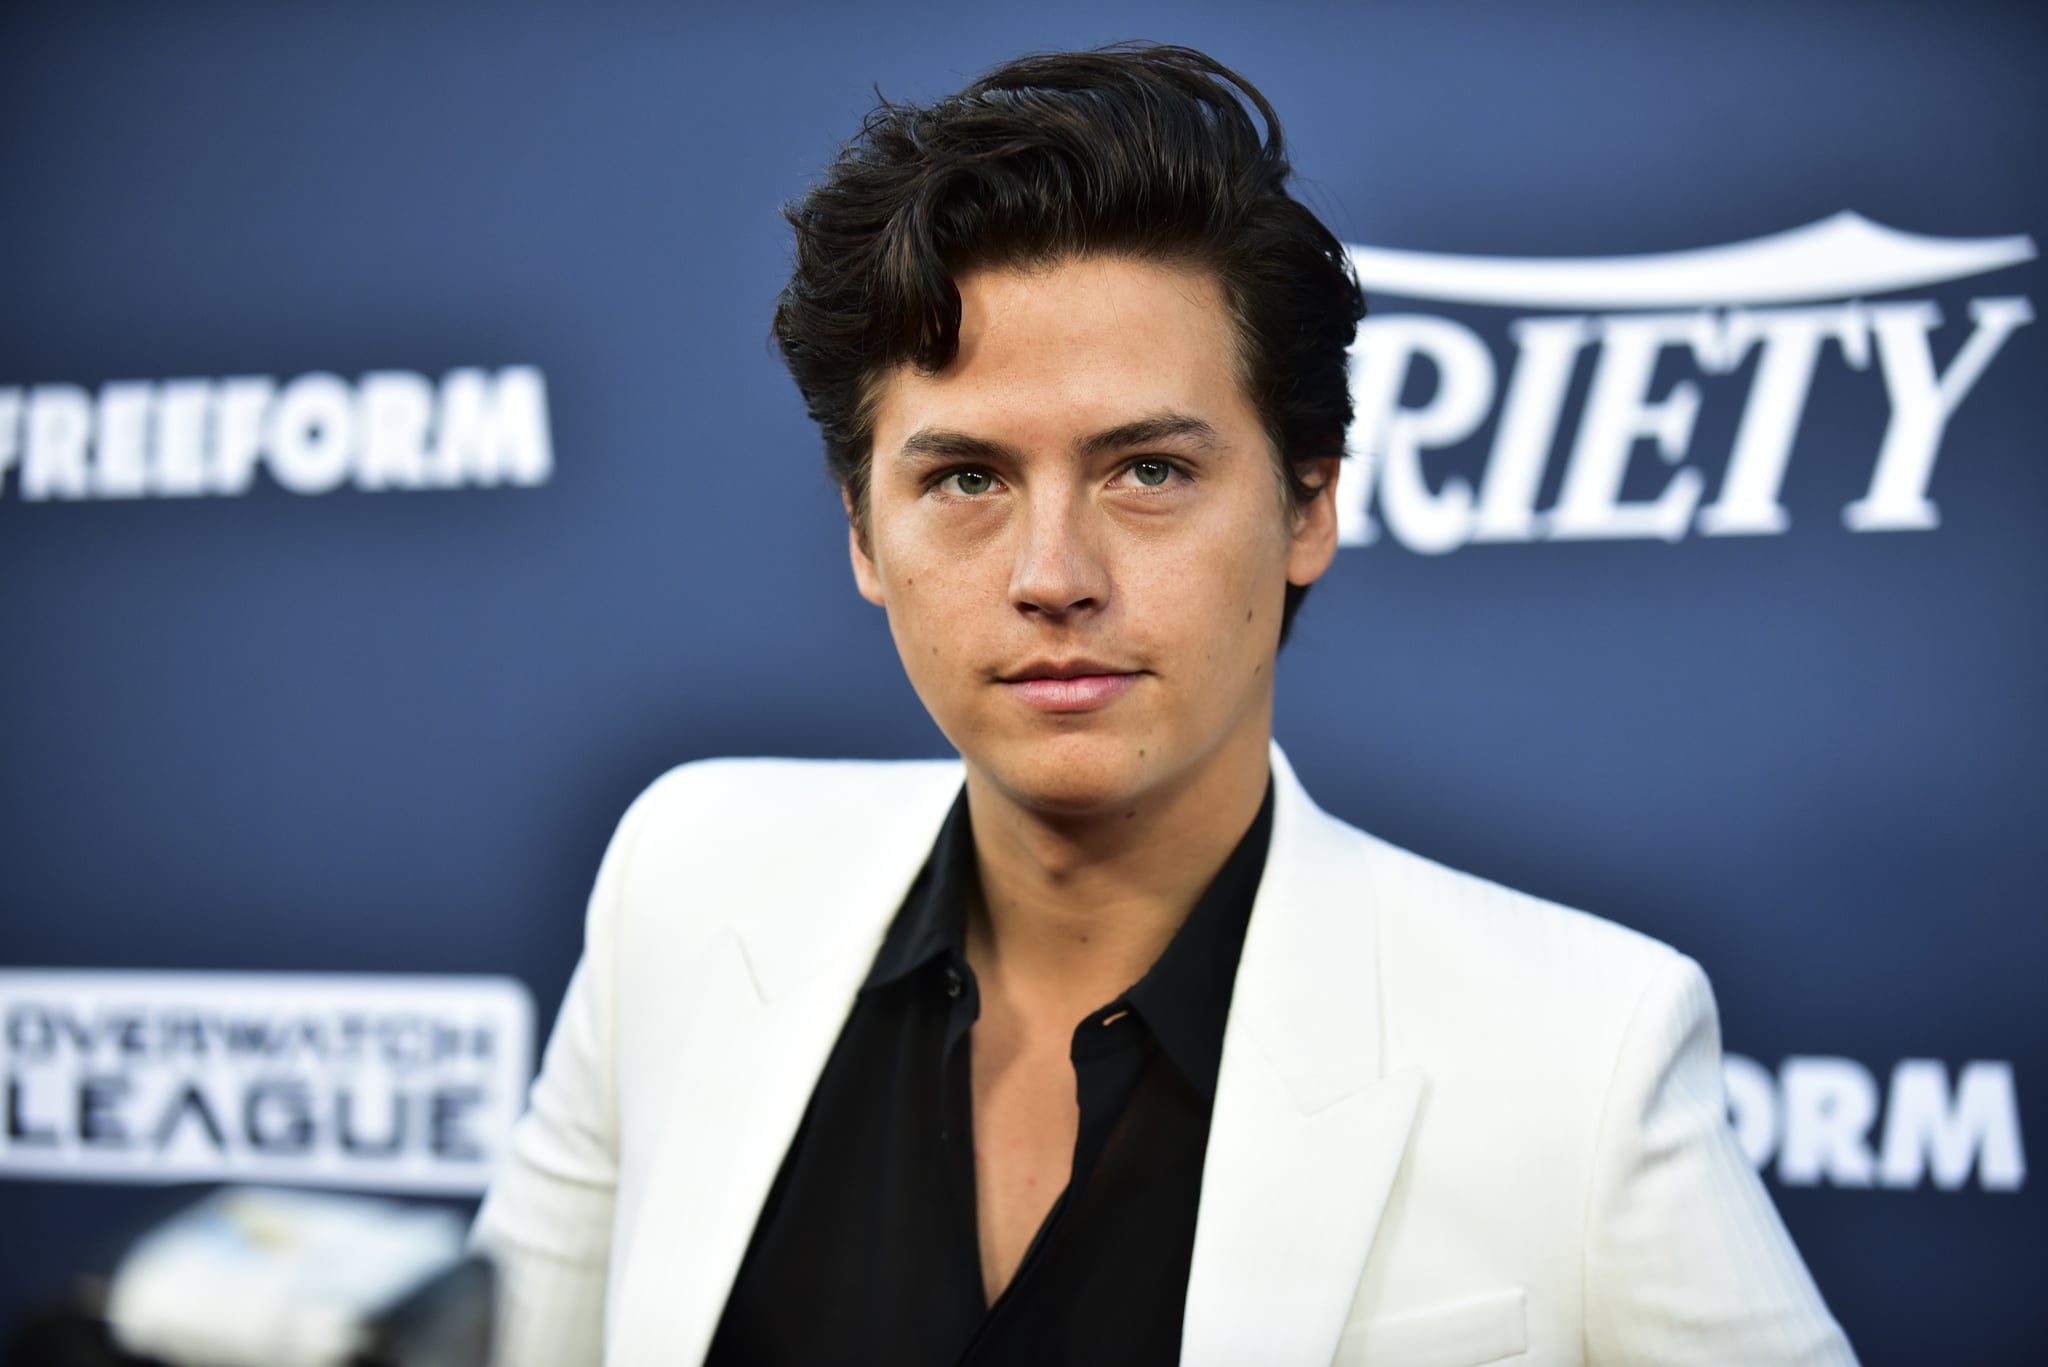 LOS ANGELES, CALIFORNIA - AUGUST 06: Cole Sprouse attends Variety's Power of Young Hollywood at The H Club Los Angeles on August 06, 2019 in Los Angeles, California. (Photo by Rodin Eckenroth/Getty Images)